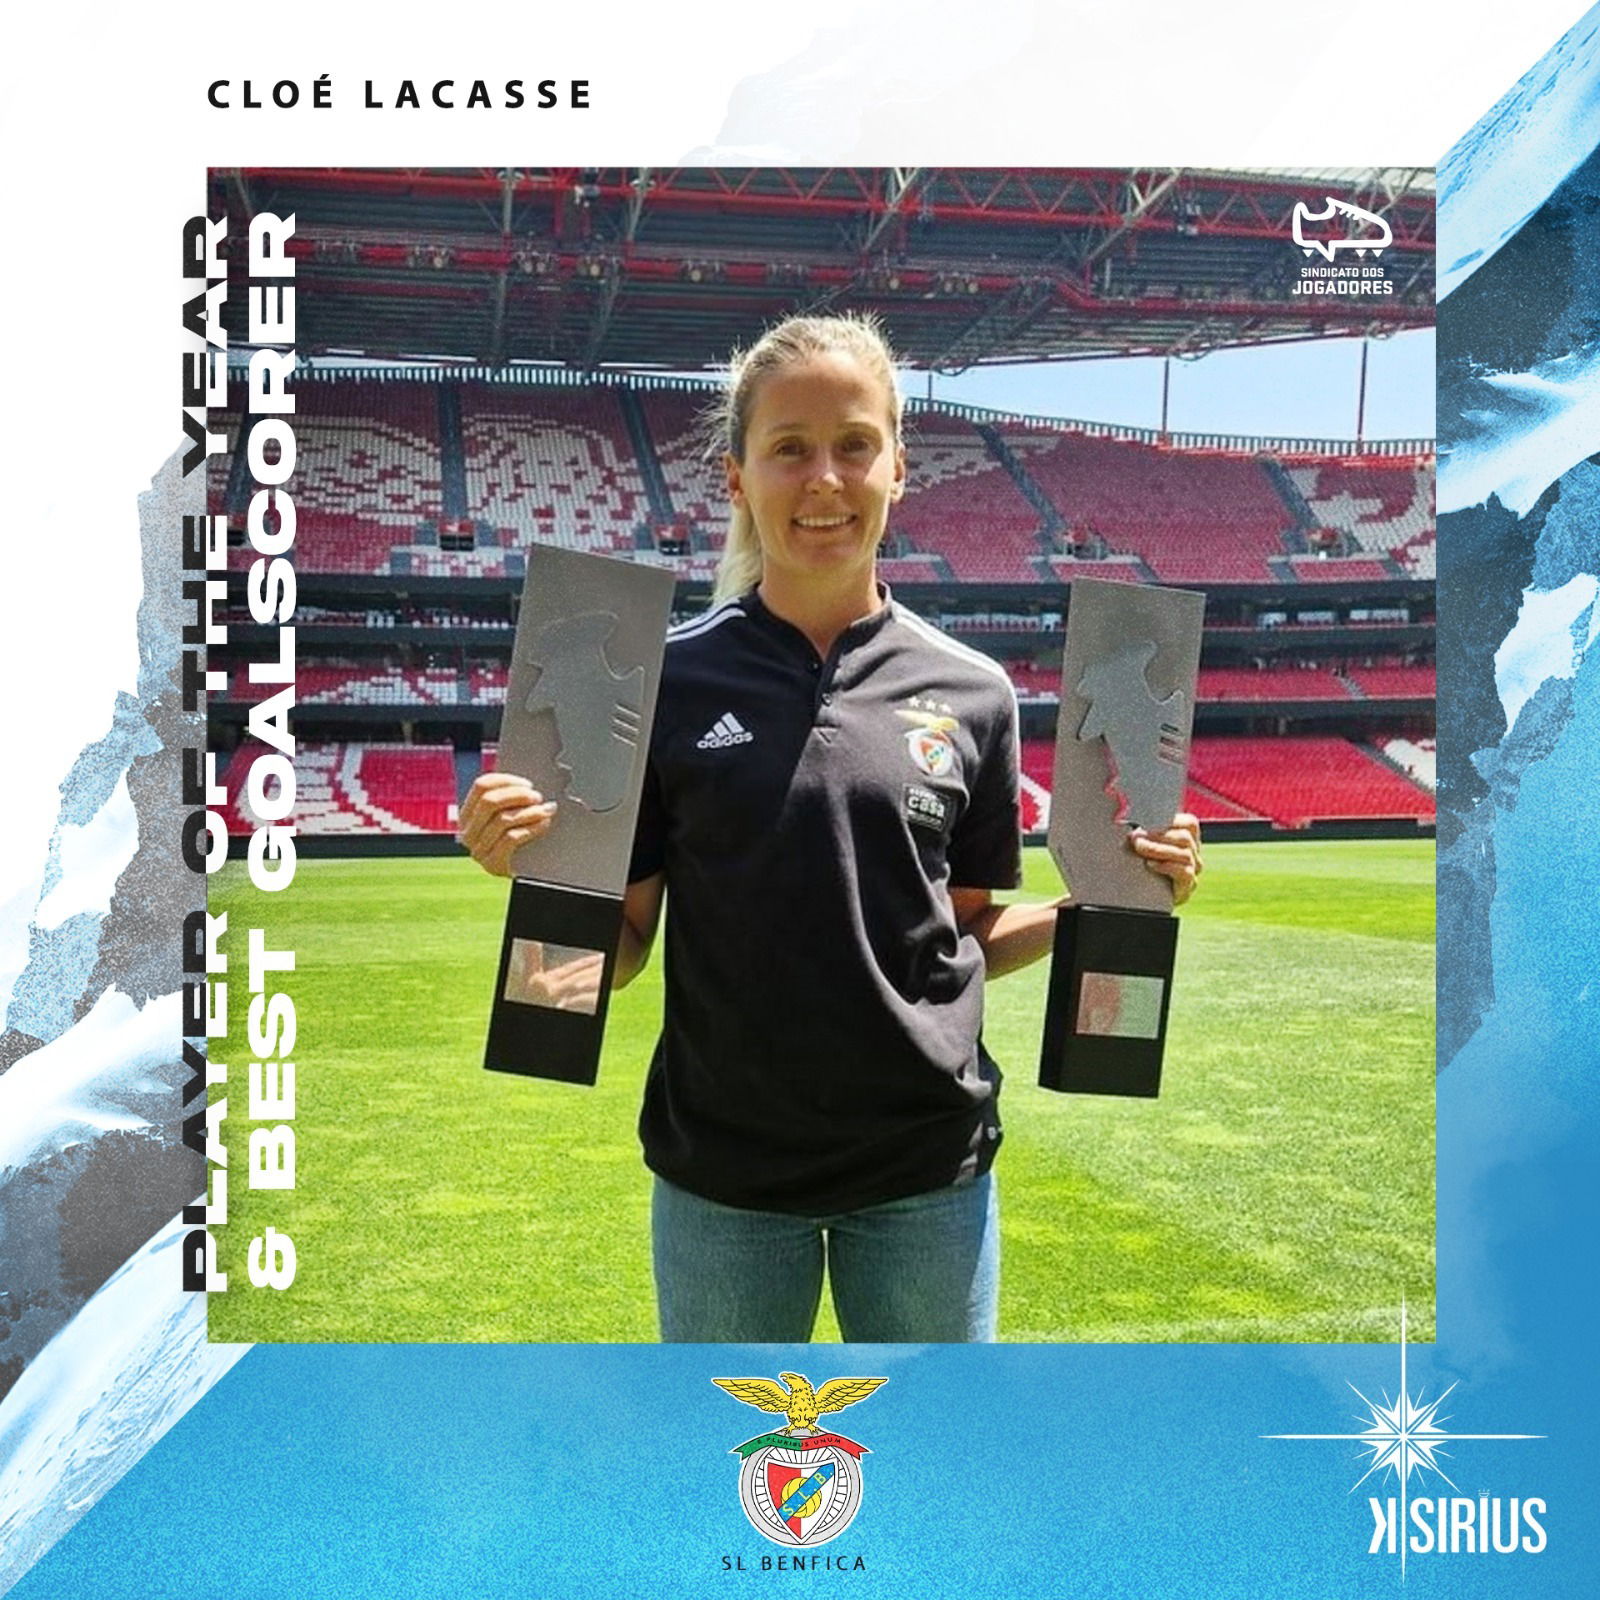 Player of the Year and Best Goal Scorer to Sindicato de Jogadores: Cloé Lacasse (SL Benfica)